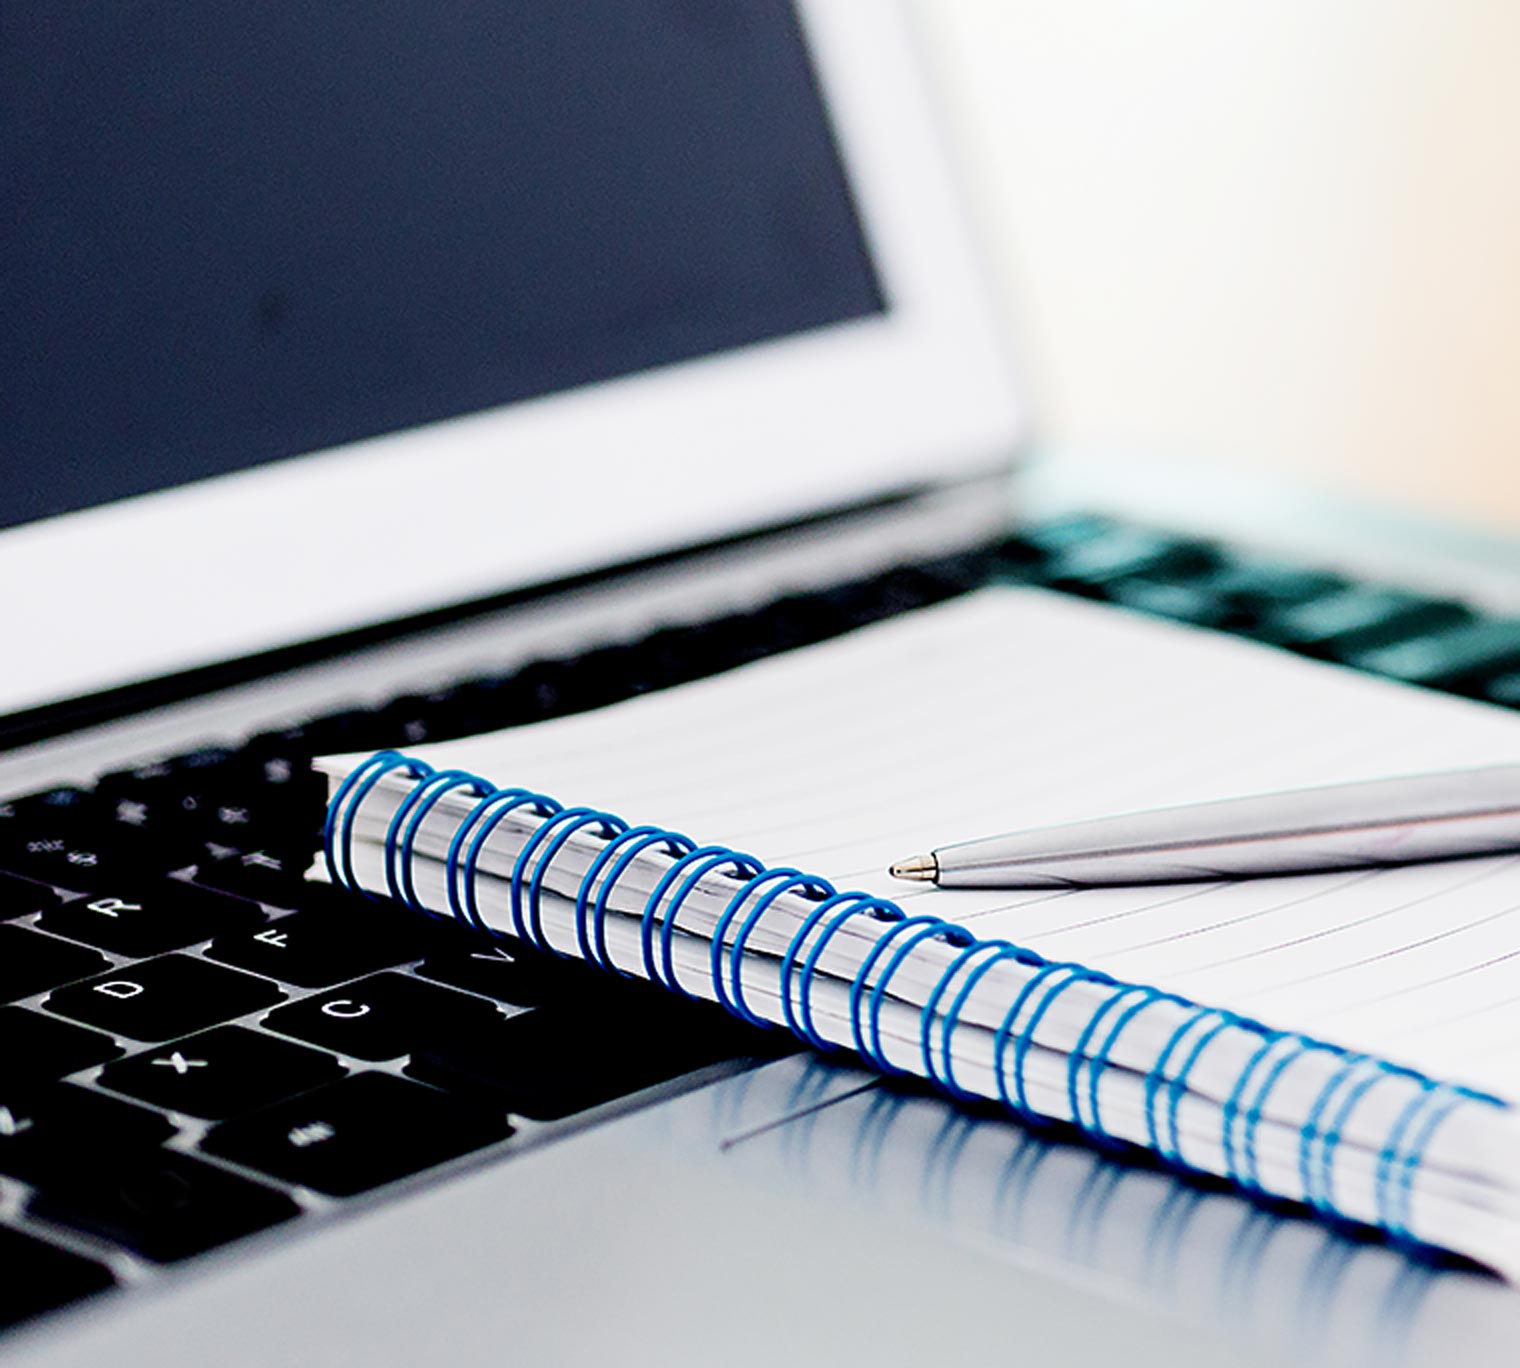 Close-up of laptop with pen and spiral notebook.